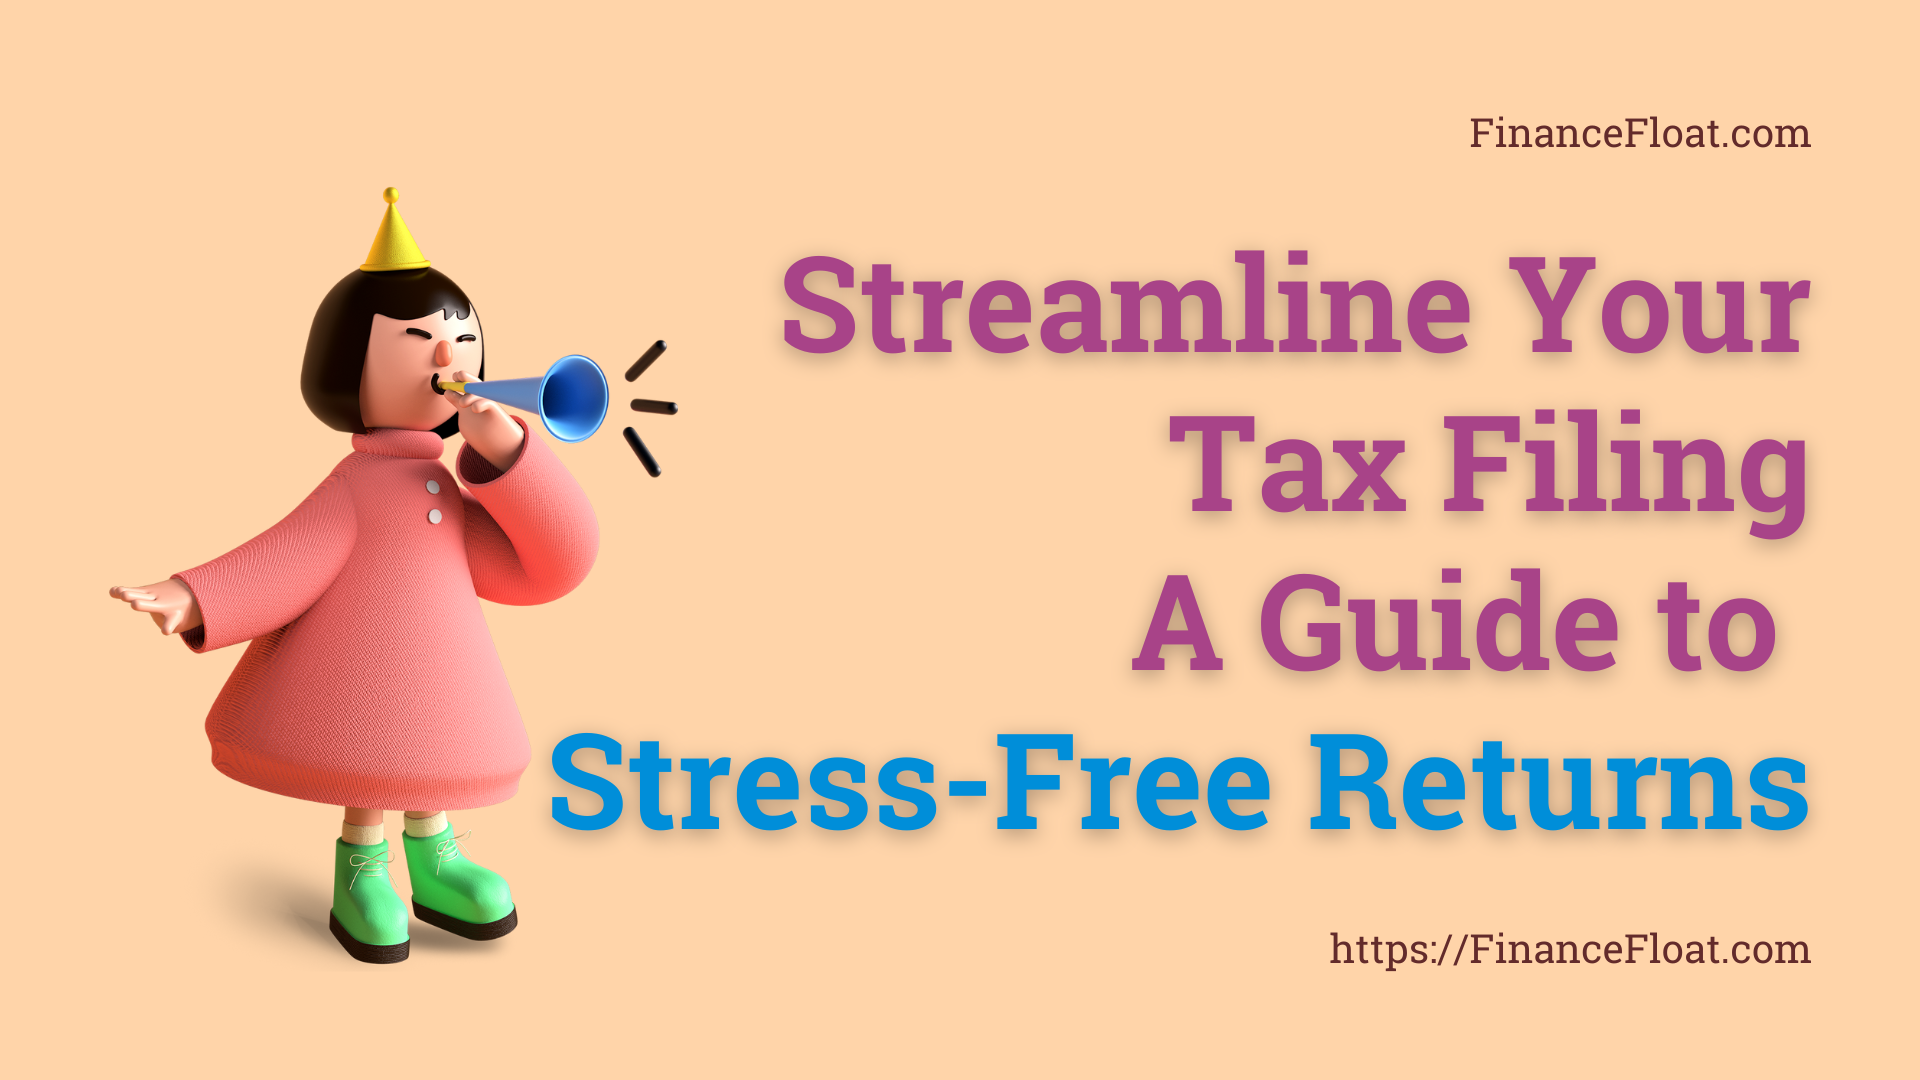 Streamline Your Tax Filing A Guide to Stress-Free Returns.